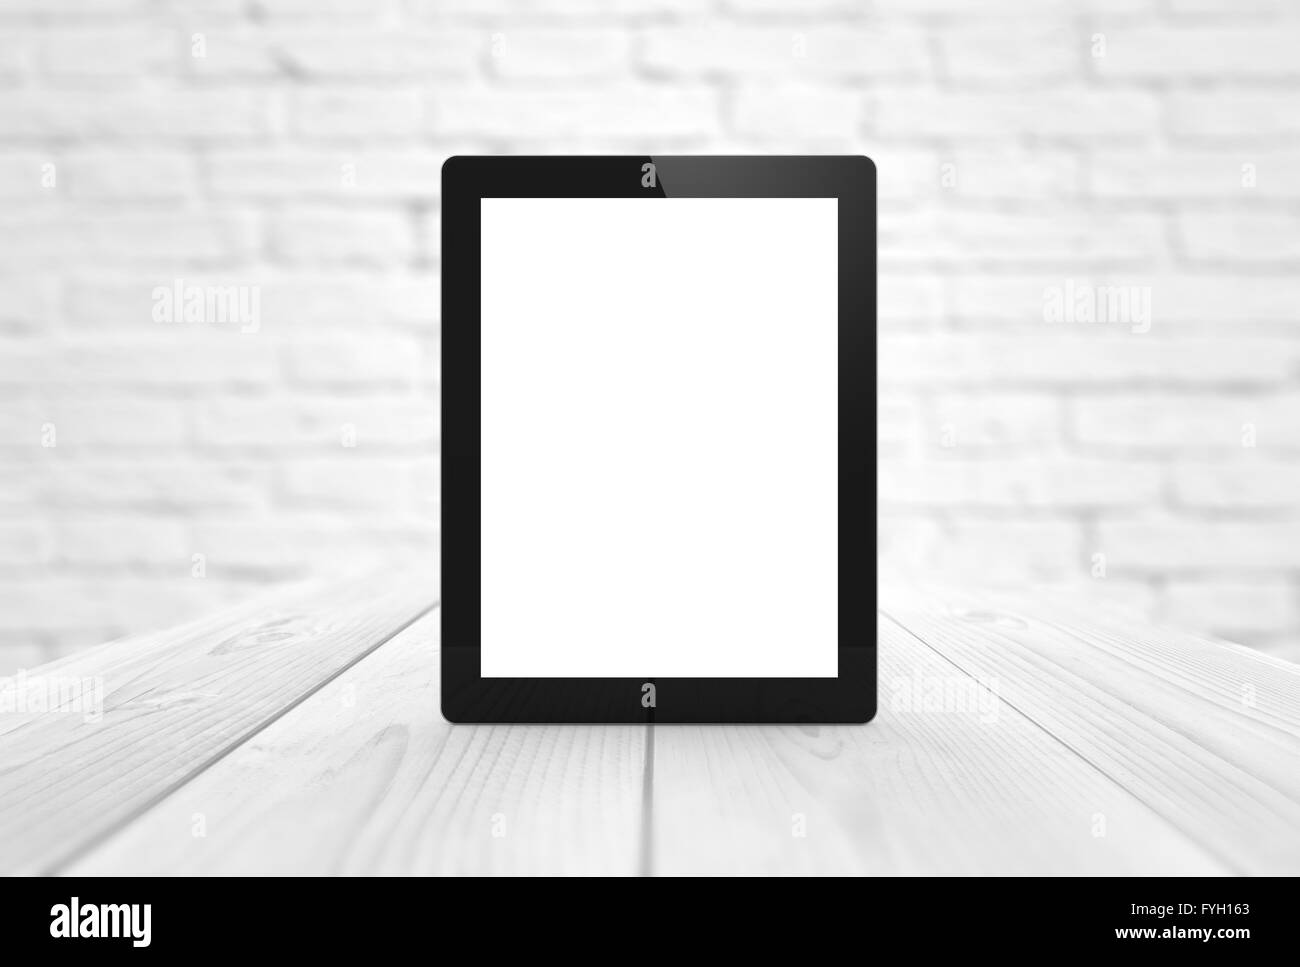 communications concept: render of a tablet with blank screen. All screen graphics are made up. Stock Photo